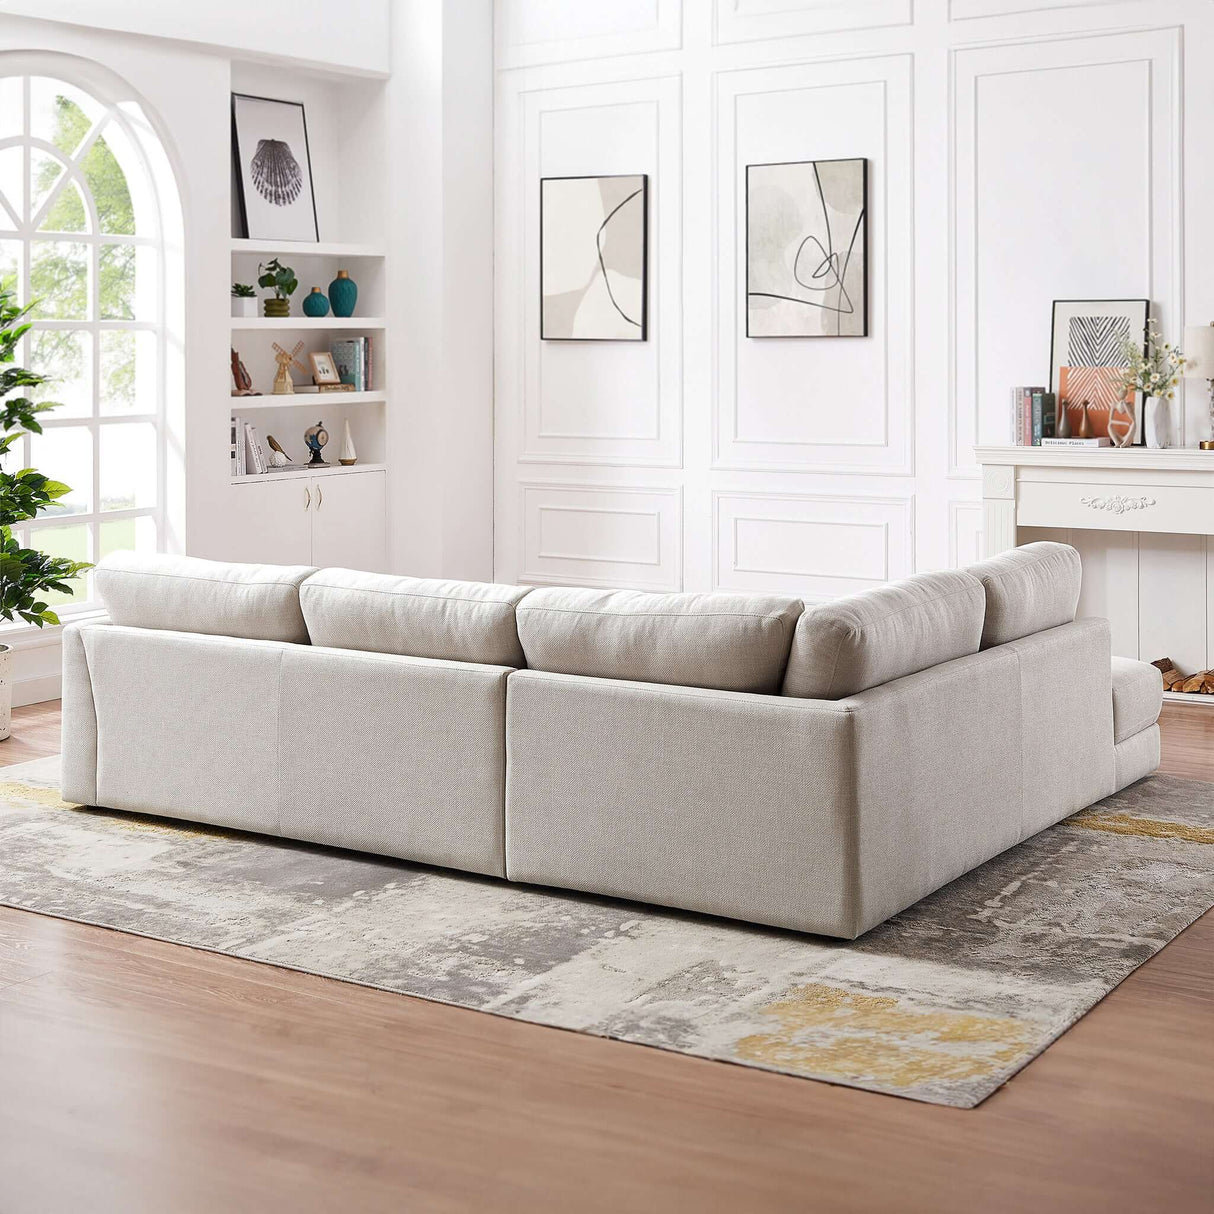 Glander  Mid-century Modern Cozy Sectional Sofa Cream / Right Sectional / Linen